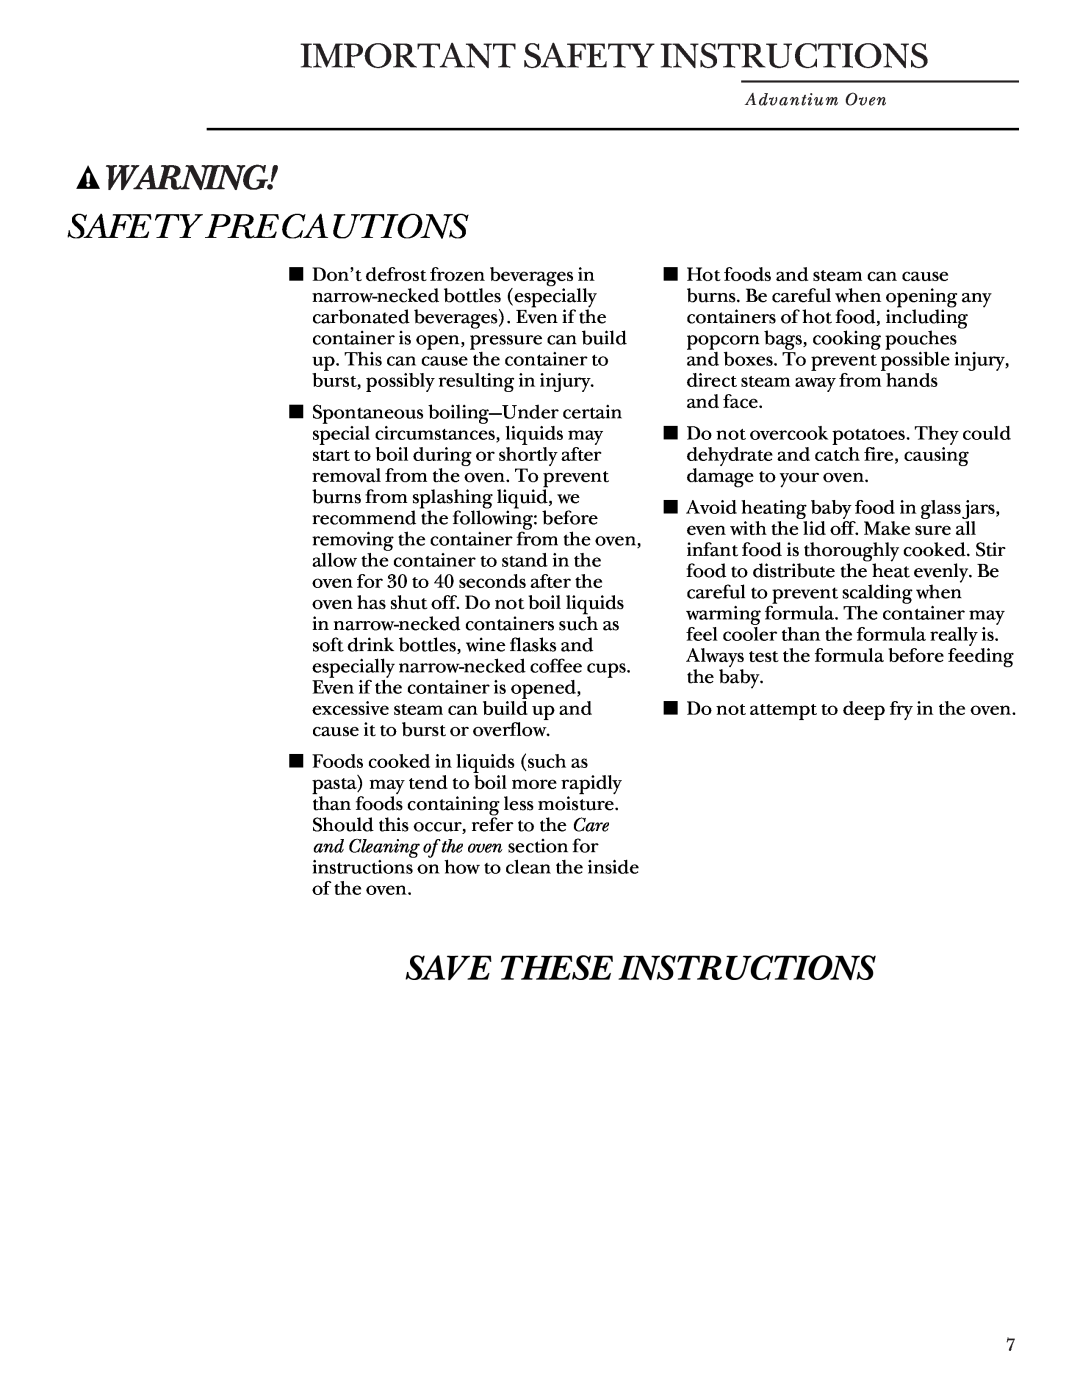 GE SCB2001, SCB2000 owner manual Save These Instructions, Important Safety Instructions, Safety Precautions, and face 